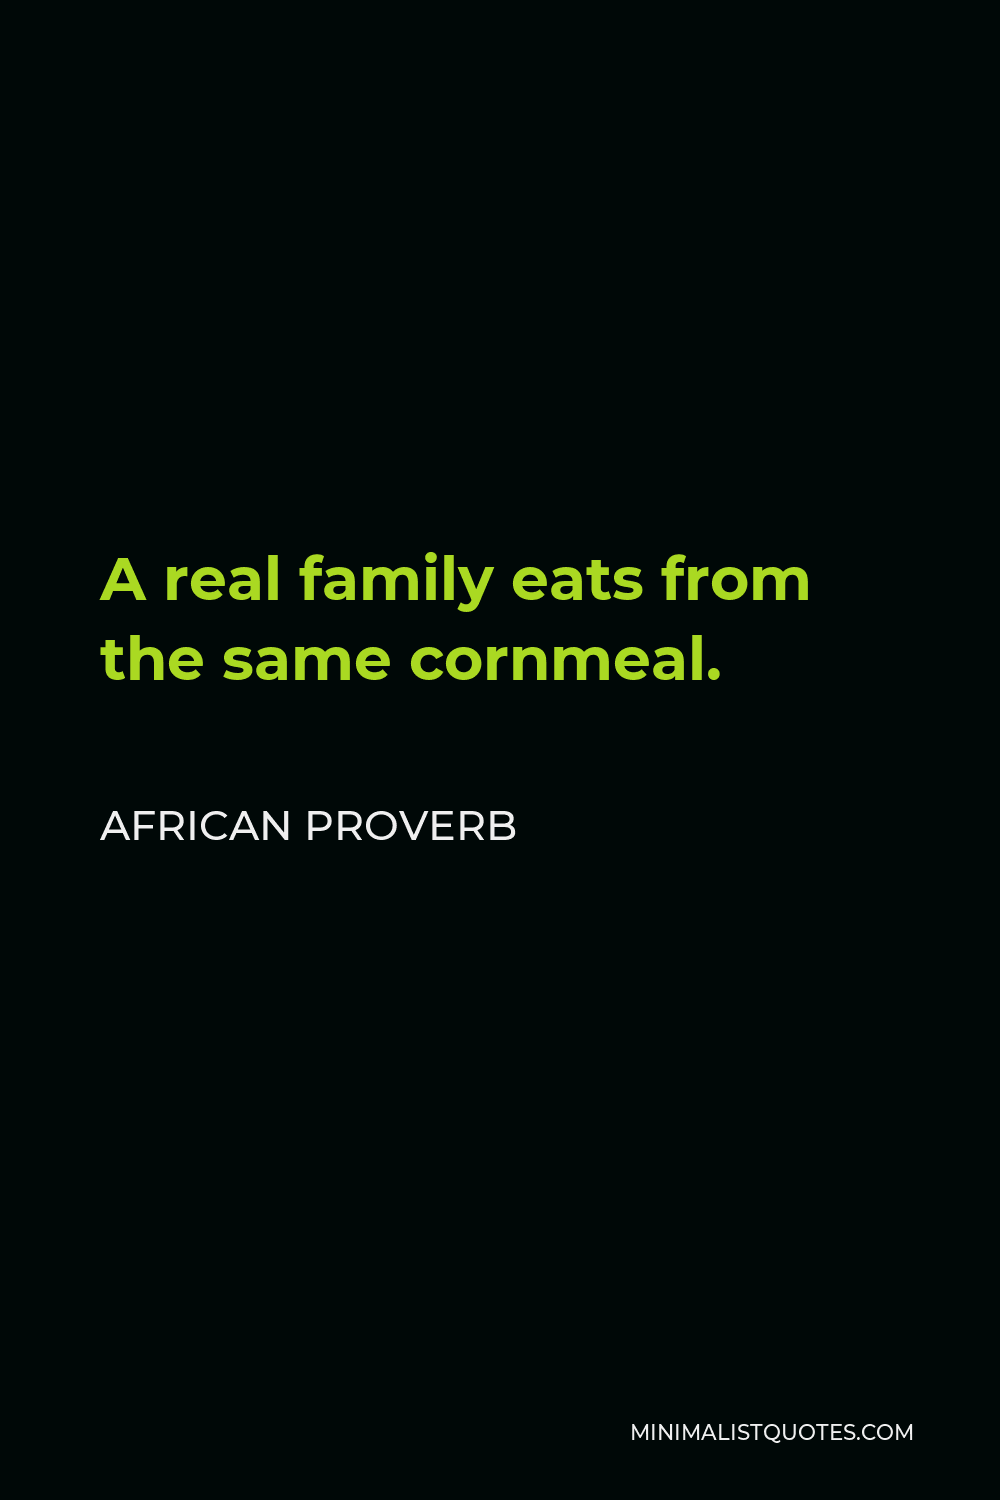 African Proverb Quote - A real family eats from the same cornmeal.